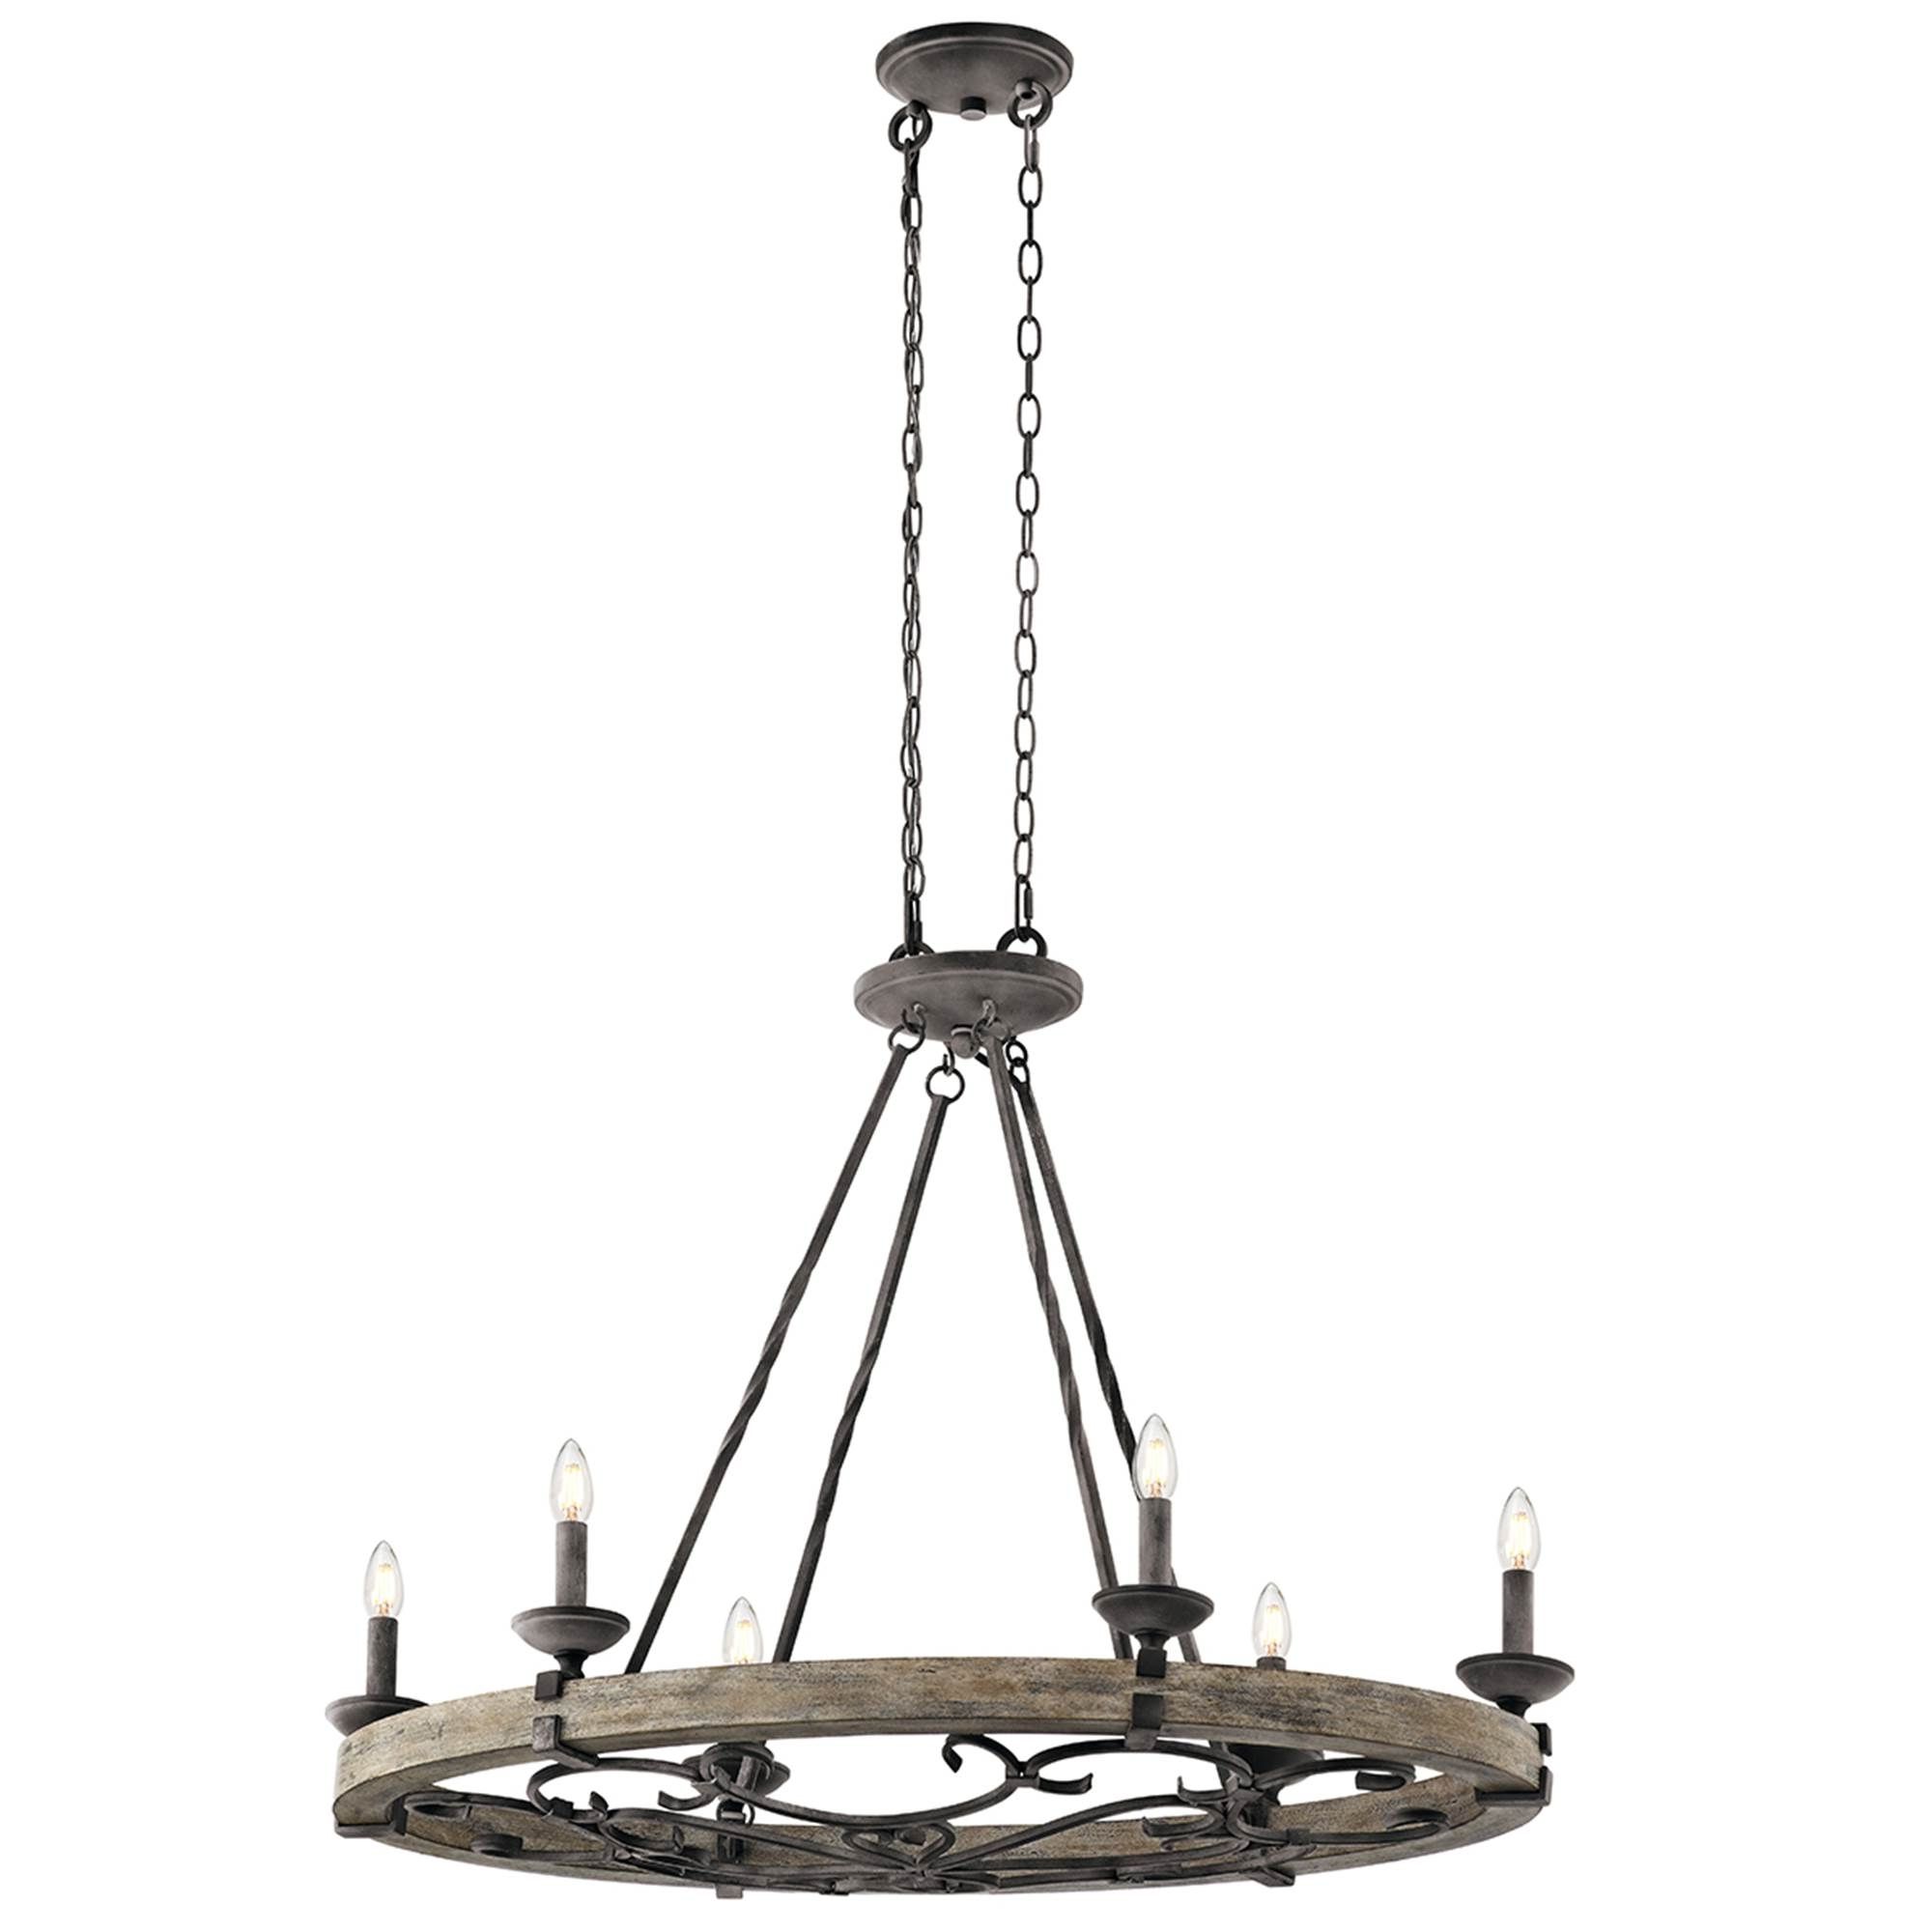 Fashionable Elstead Taulbee 6 Light Oval Chandelier Weathered Zinc – Ceiling Lights (View 11 of 15)